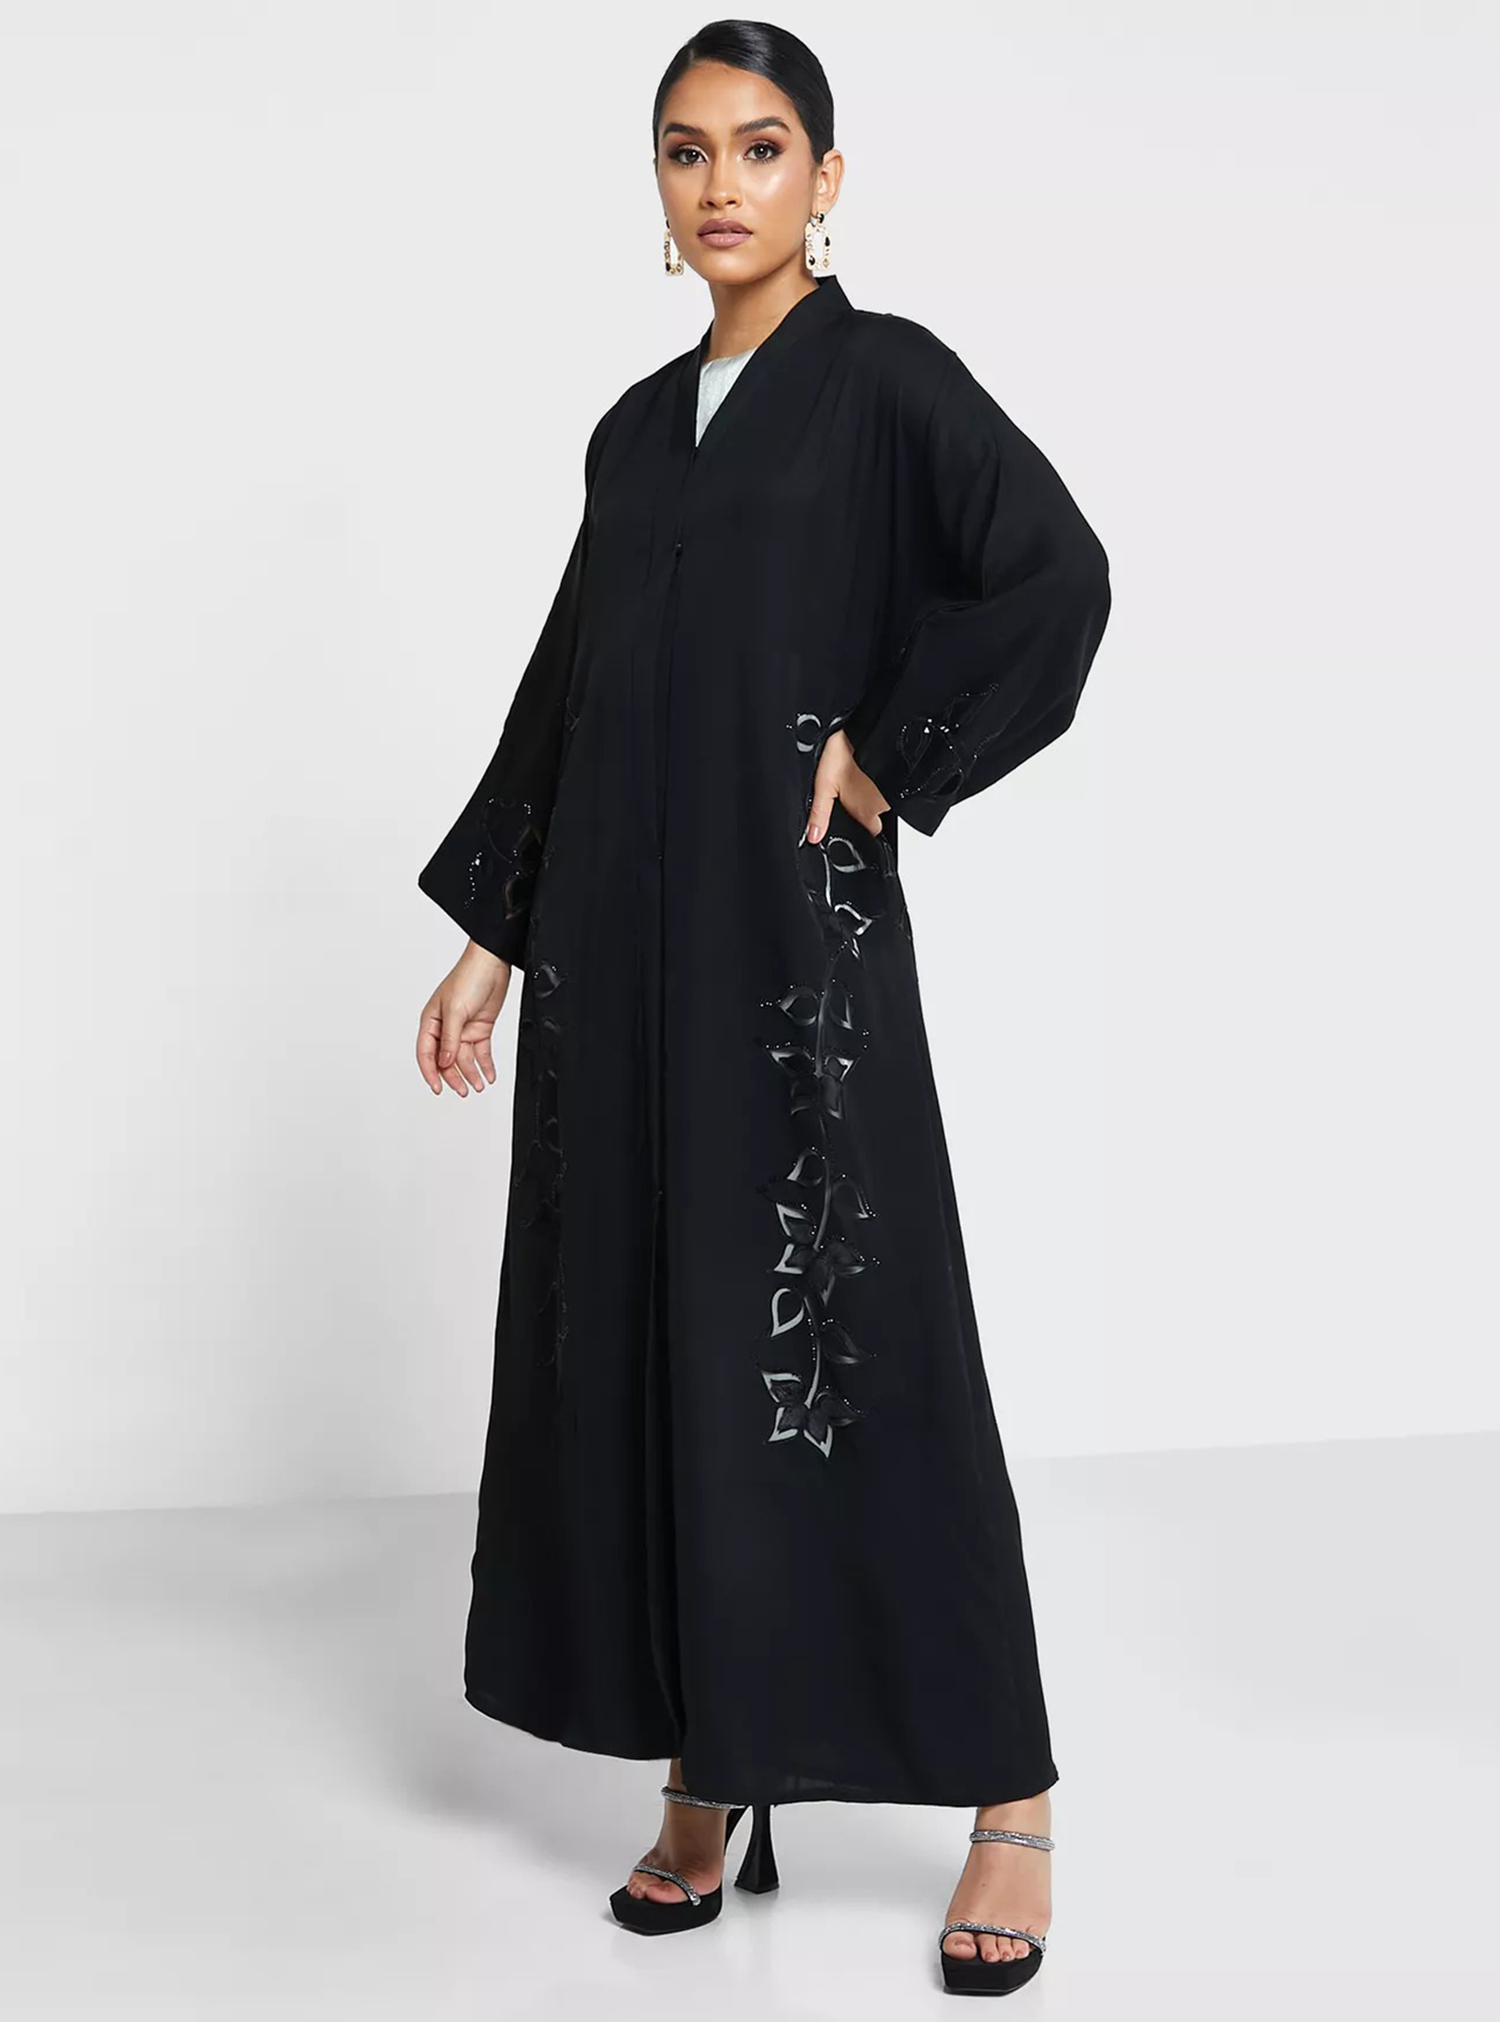 SHAJAM5527 Black abaya with floral cut-outs. Comes with matching ...